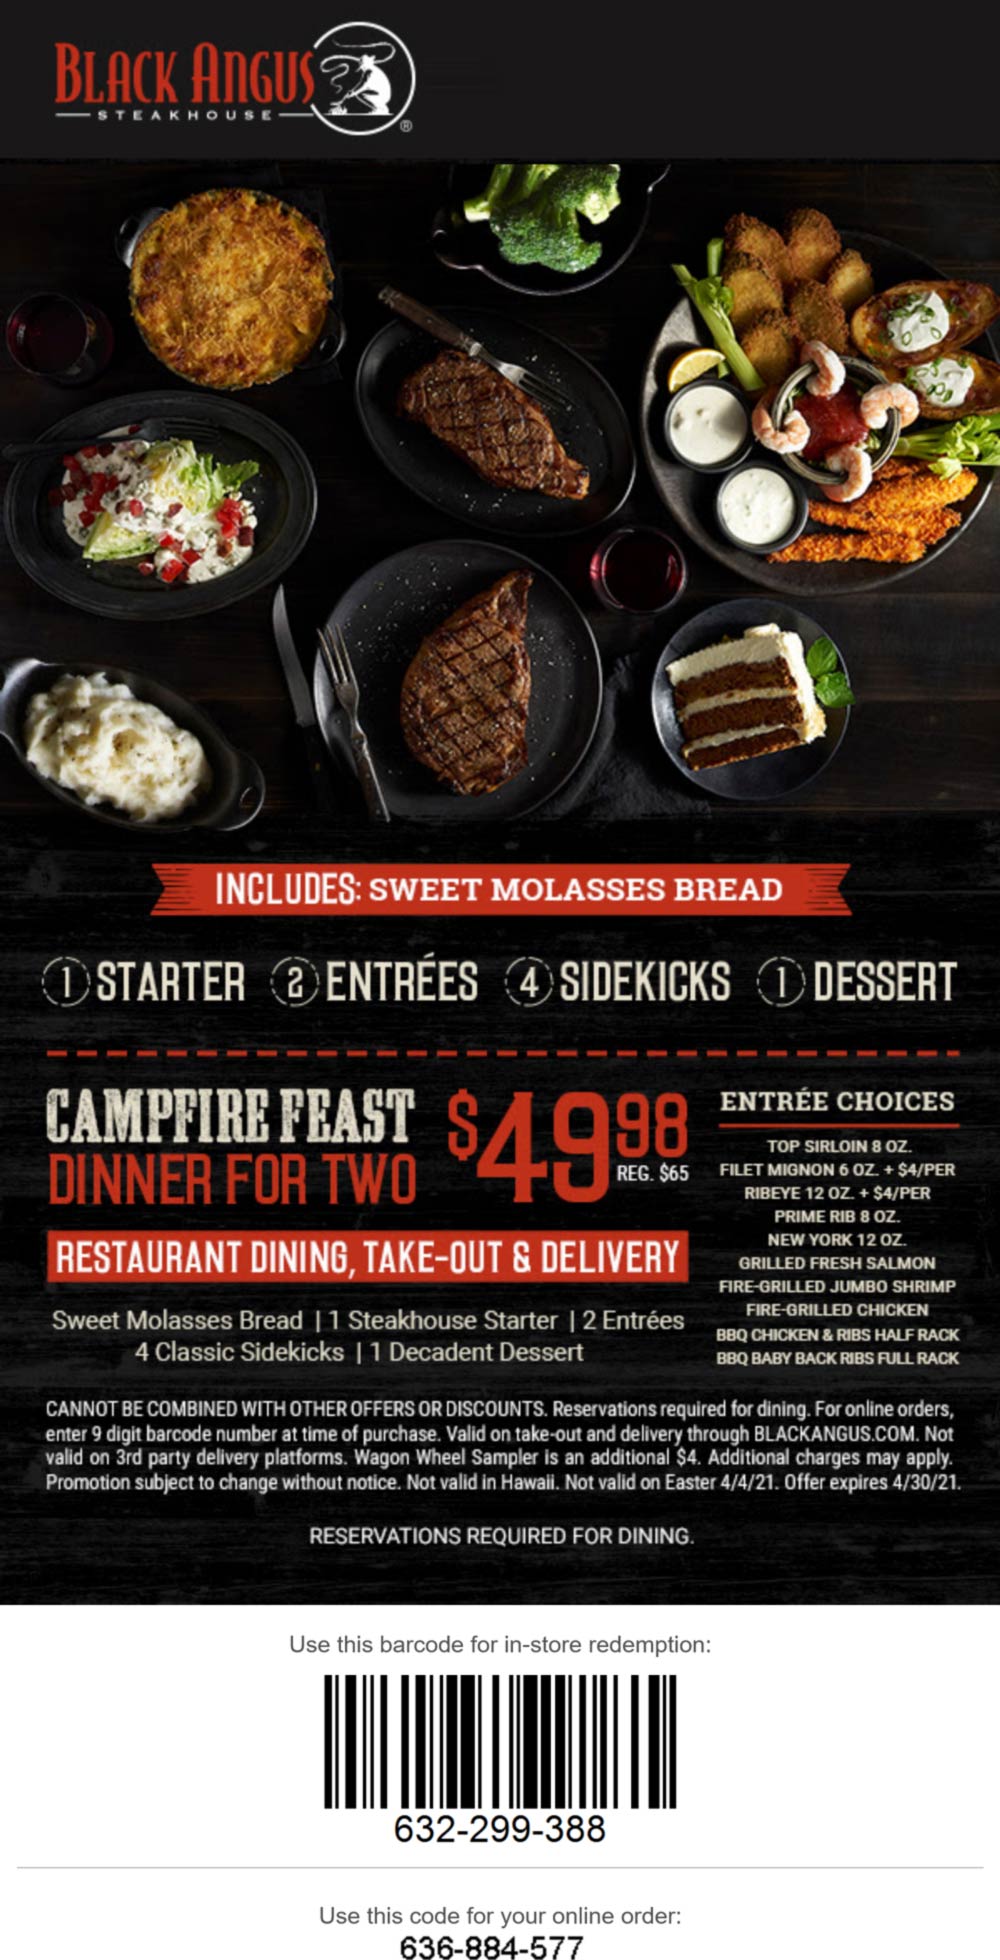 3 course meal for 2 = 50 at Black Angus steakhouse blackangus The